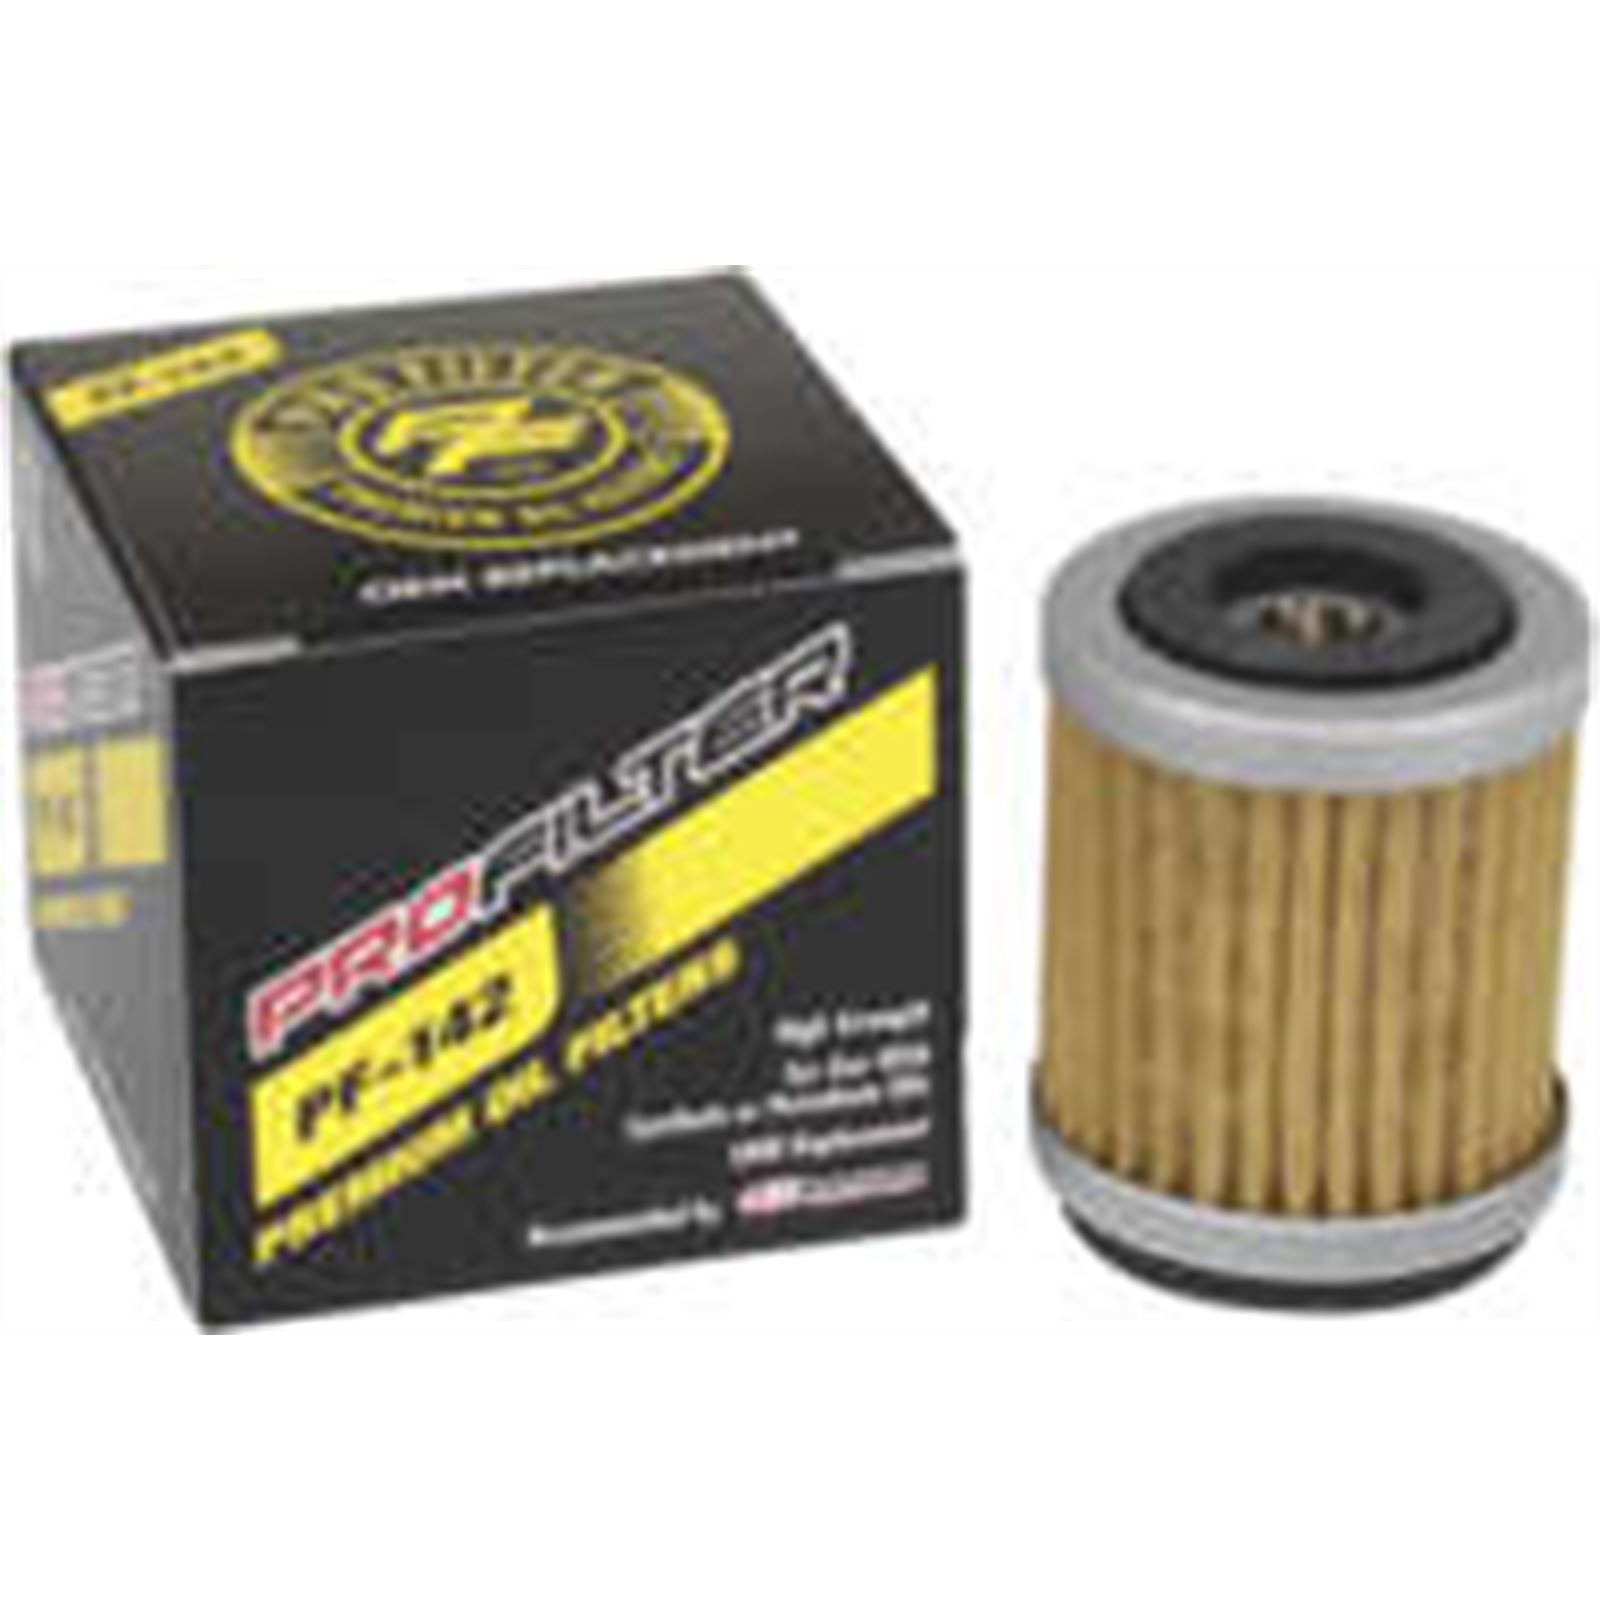 Pro Filter Replacement Oil Filter for Yamaha/ TM